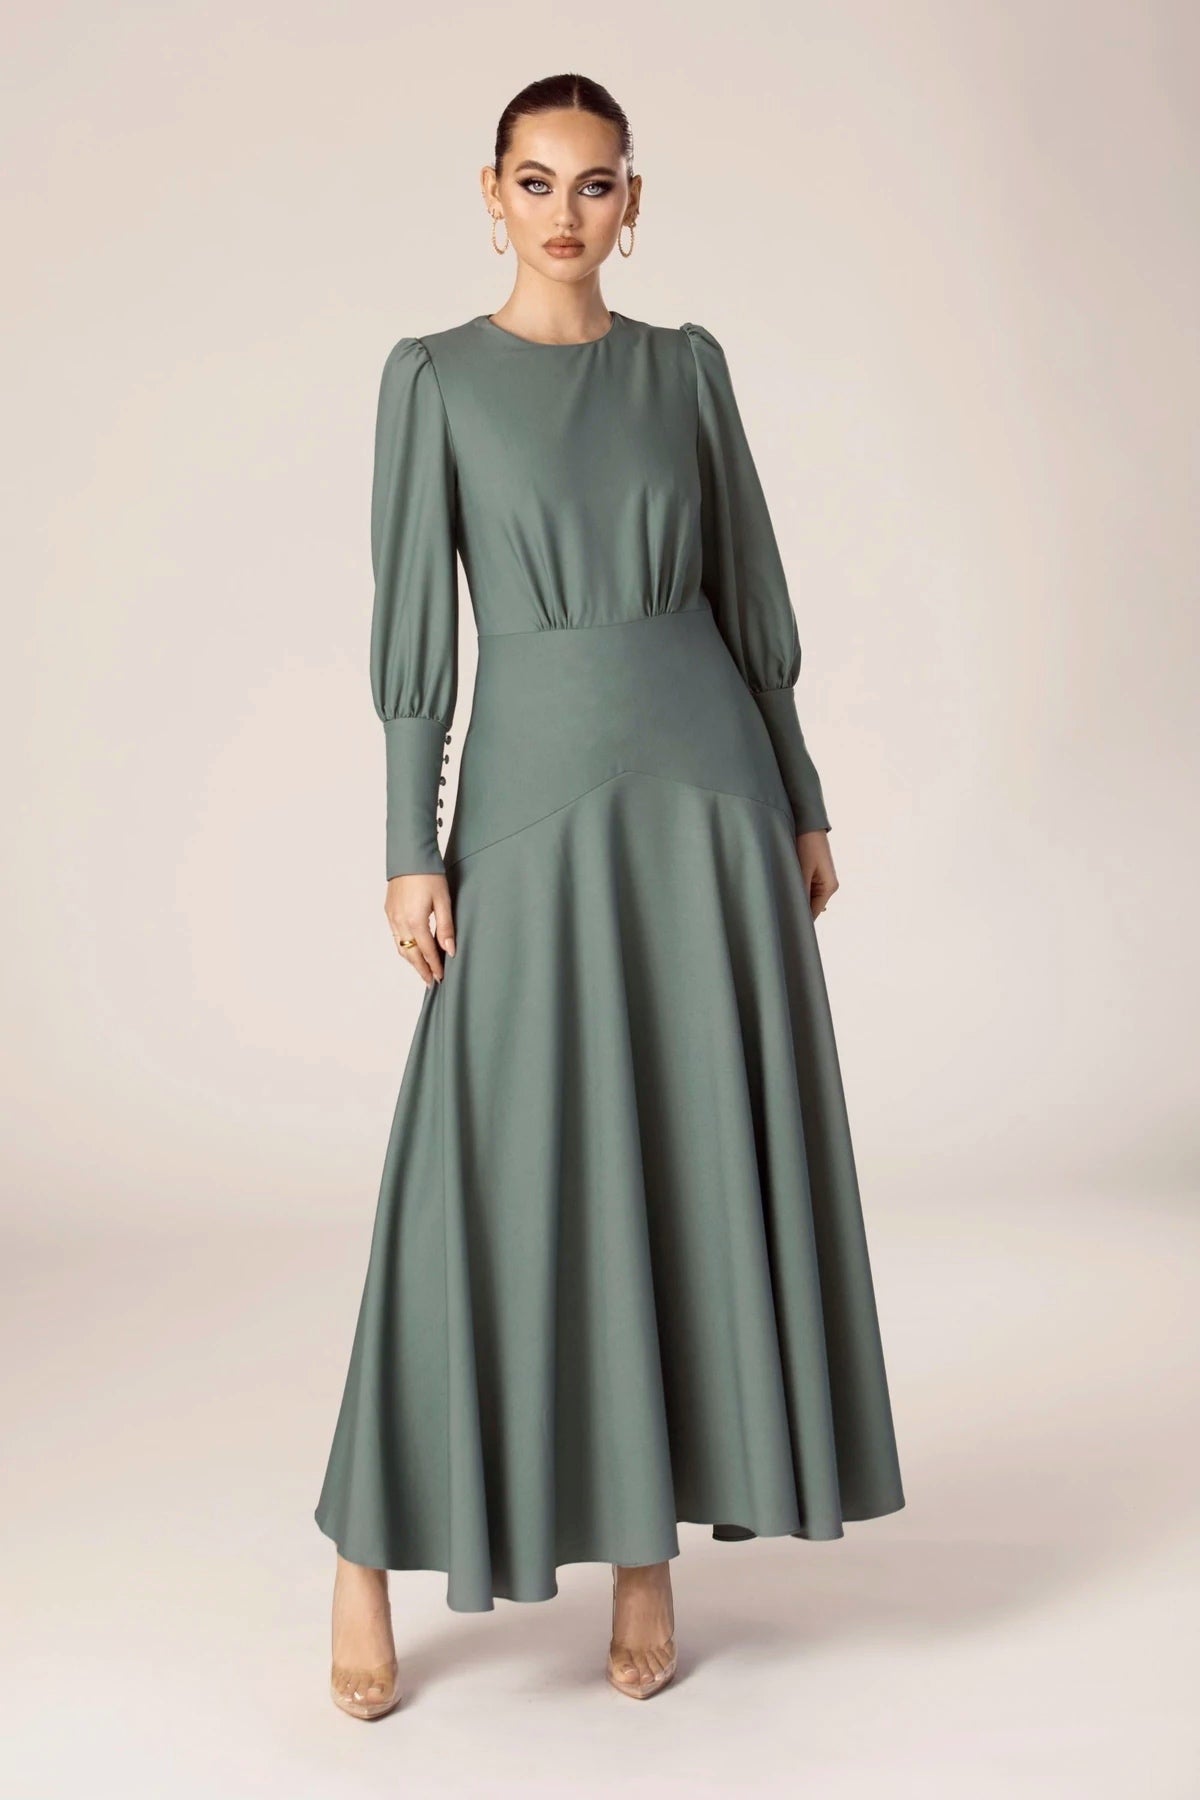 Veiled | Modest Maxi Dresses 4 Page – for Women